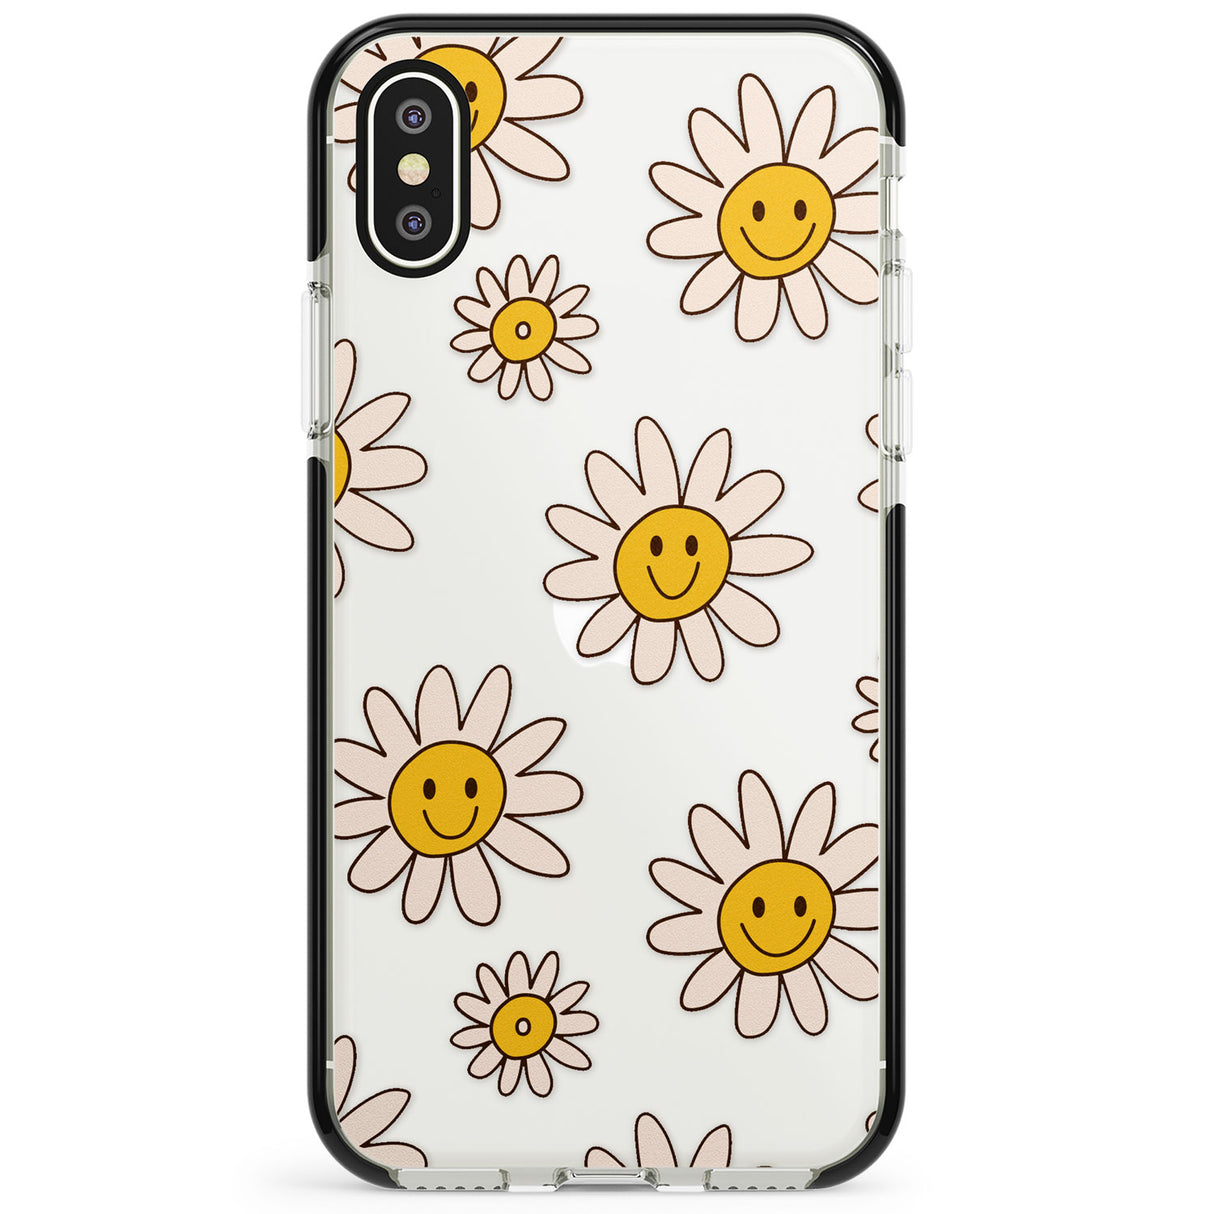 Daisy Faces Phone Case for iPhone X XS Max XR